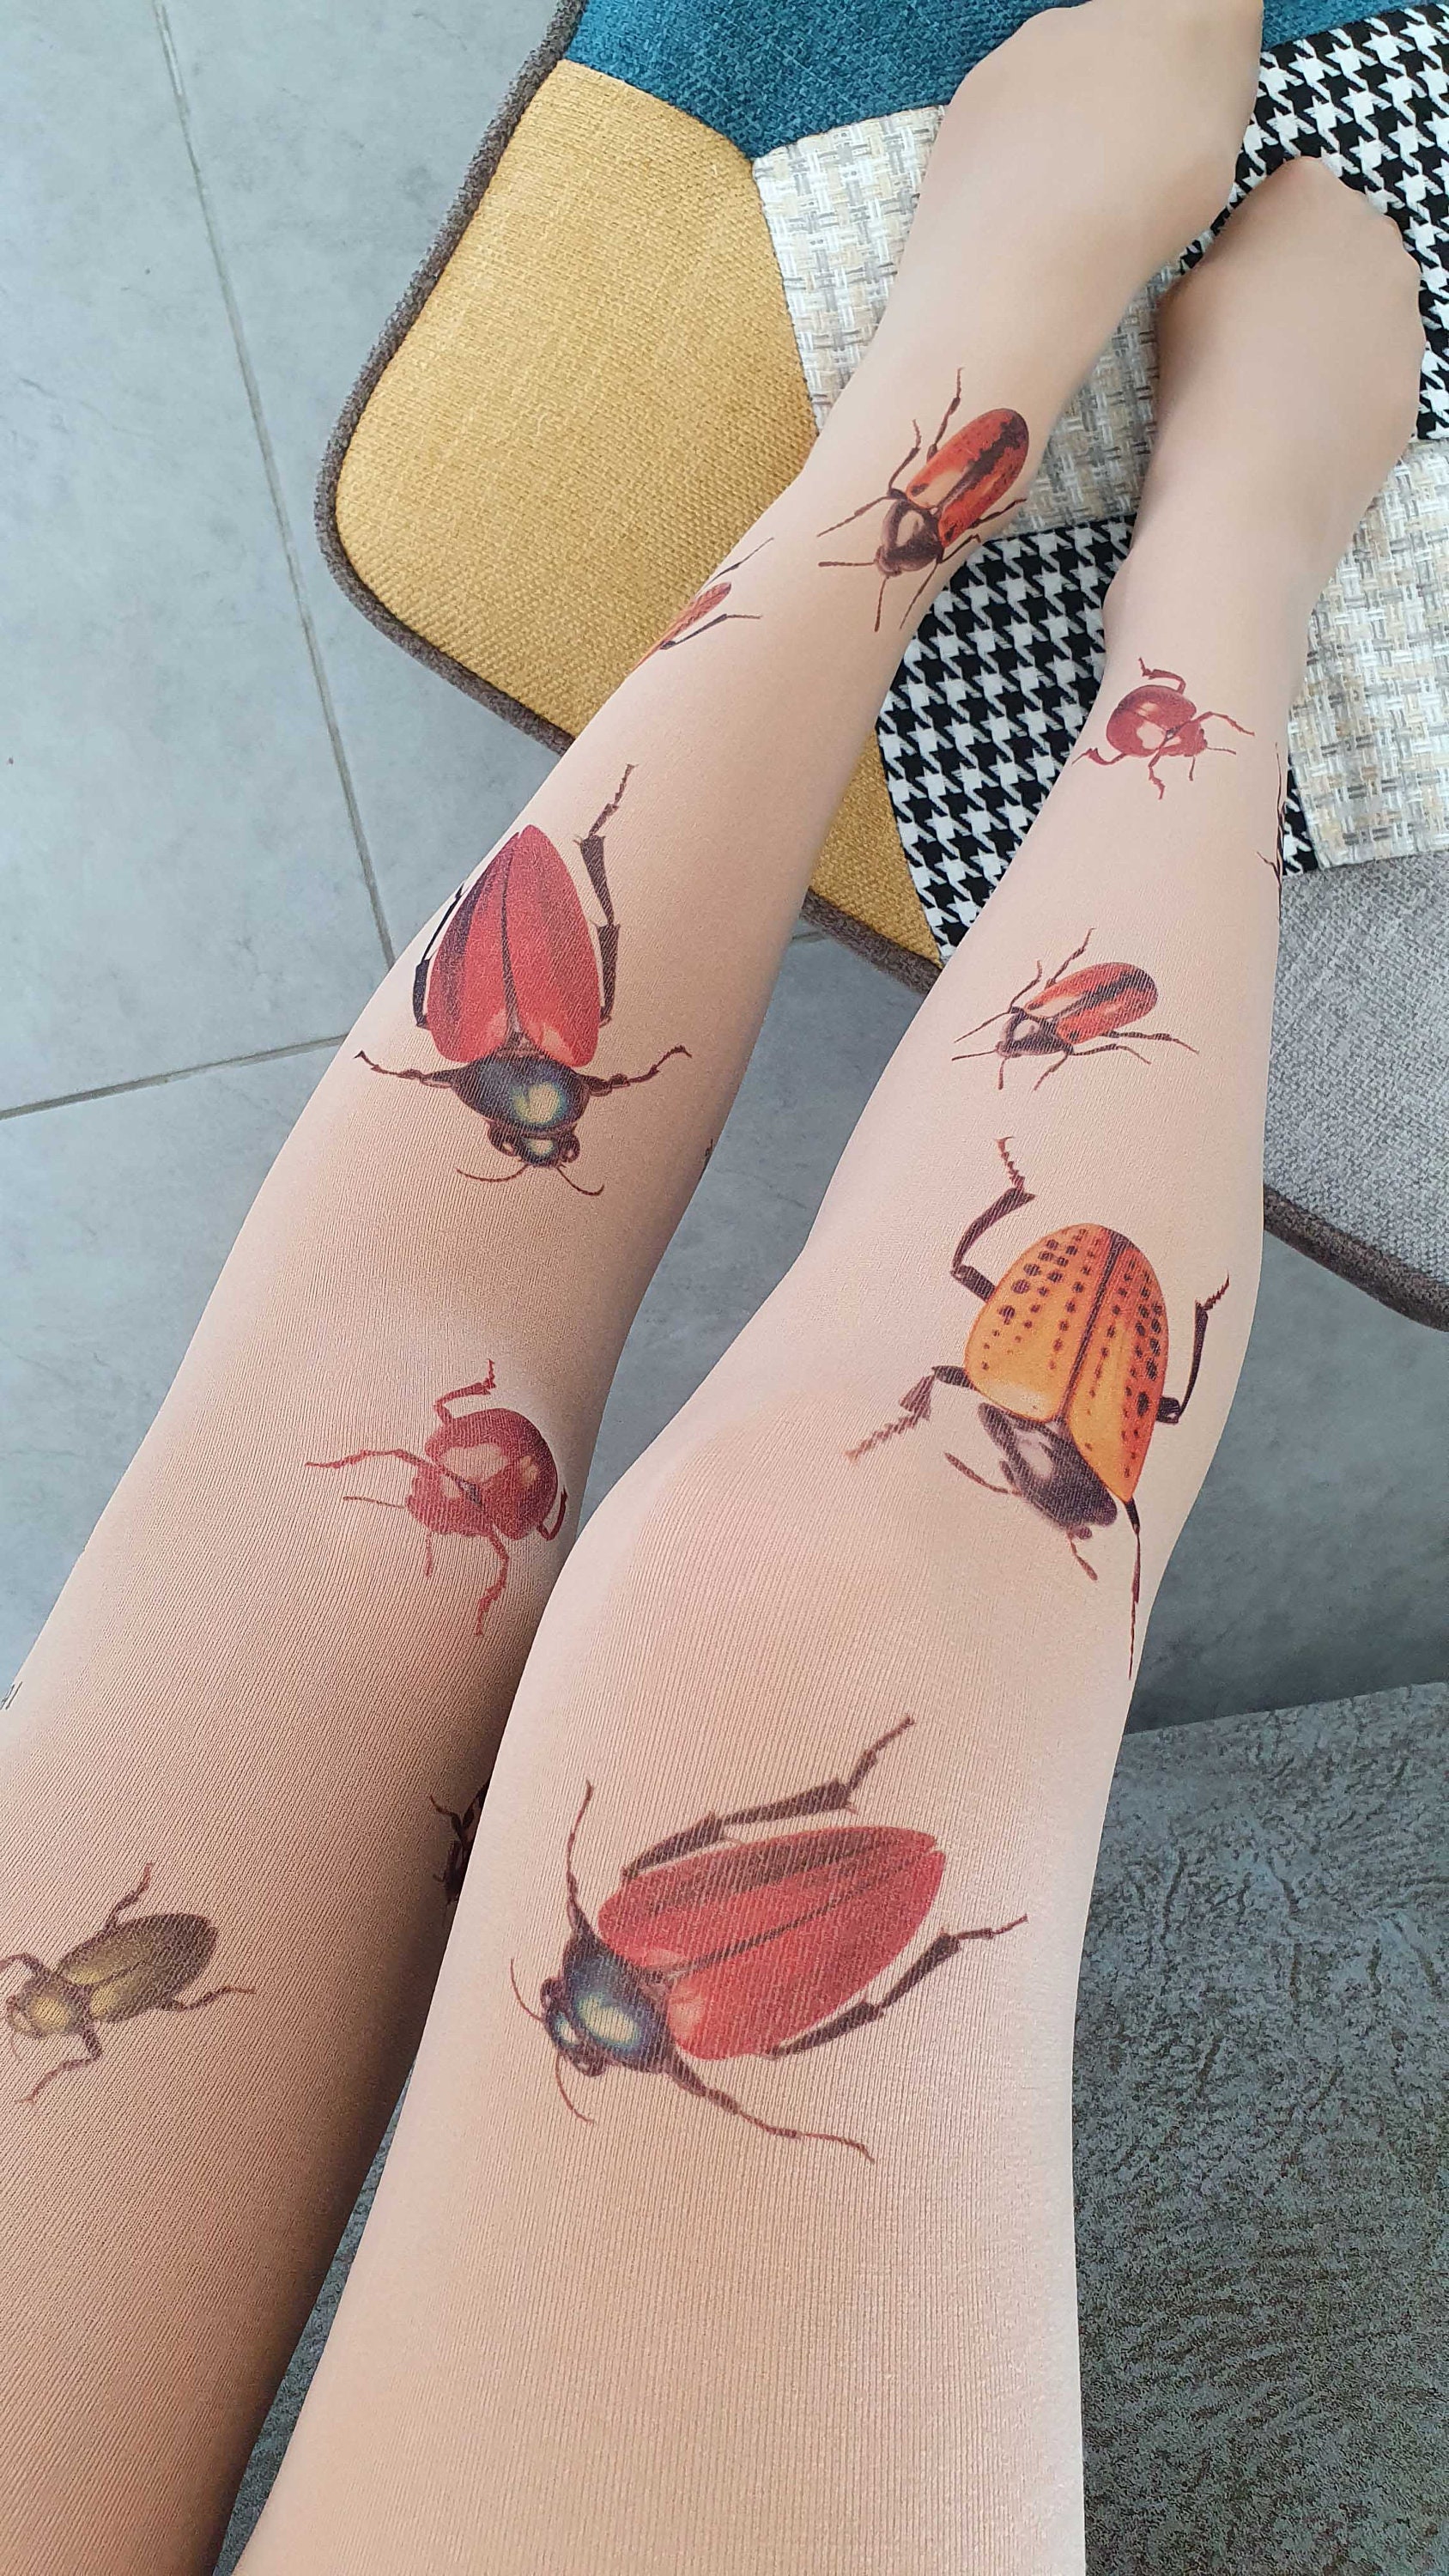 Bugs Opaque Tights, Insect Printed Tights, Beetles Print, Halloween, Beetle  Tights, Botanical -  Canada